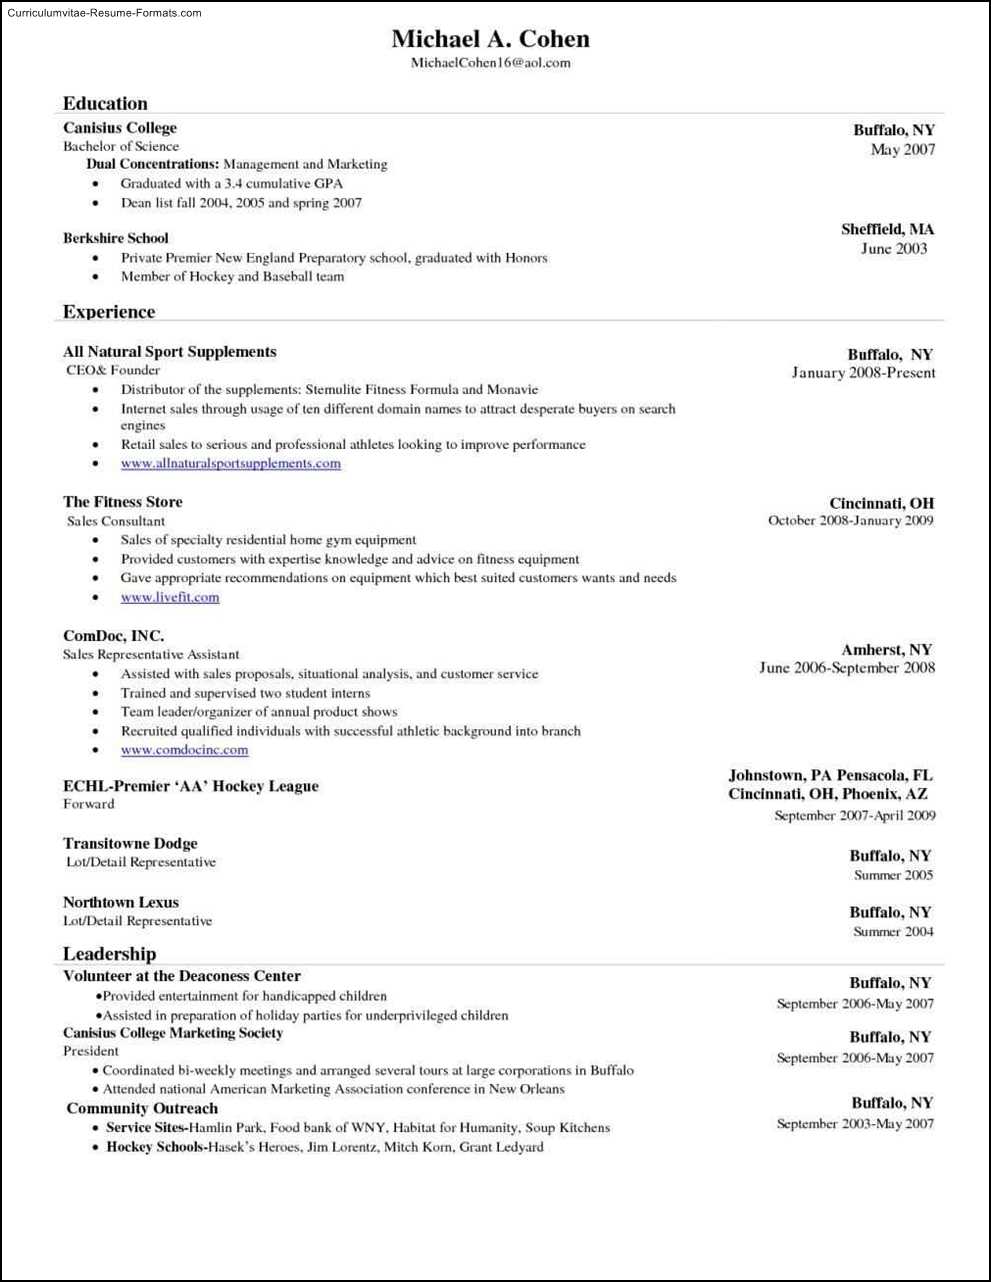 Resume Wizard In Ms Word | Professional Resumes Sample Online In Resume Templates Microsoft Word 2010